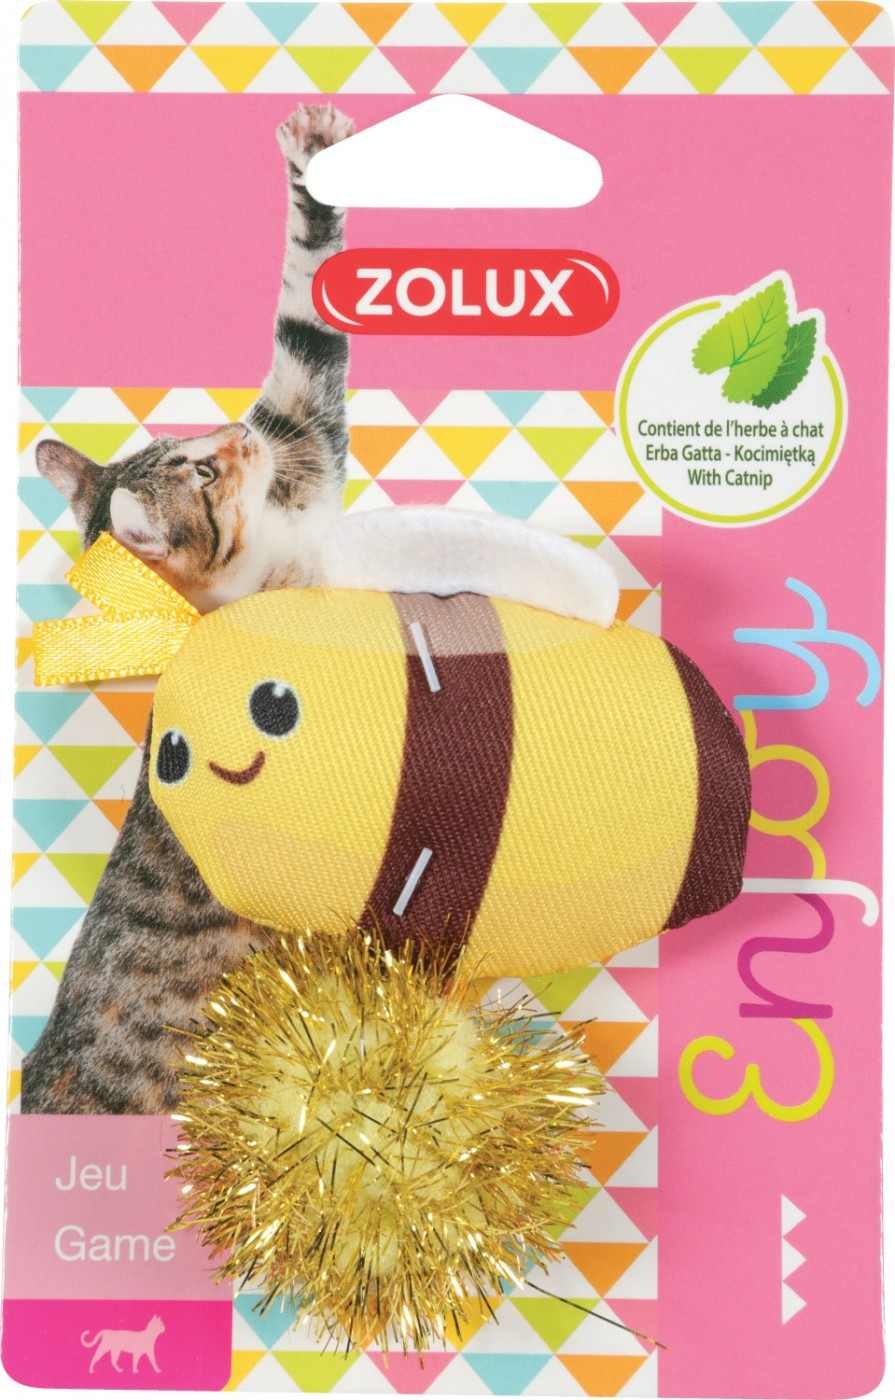 Zolux Jouet chat Lovely avec herbe à chat - Abeille